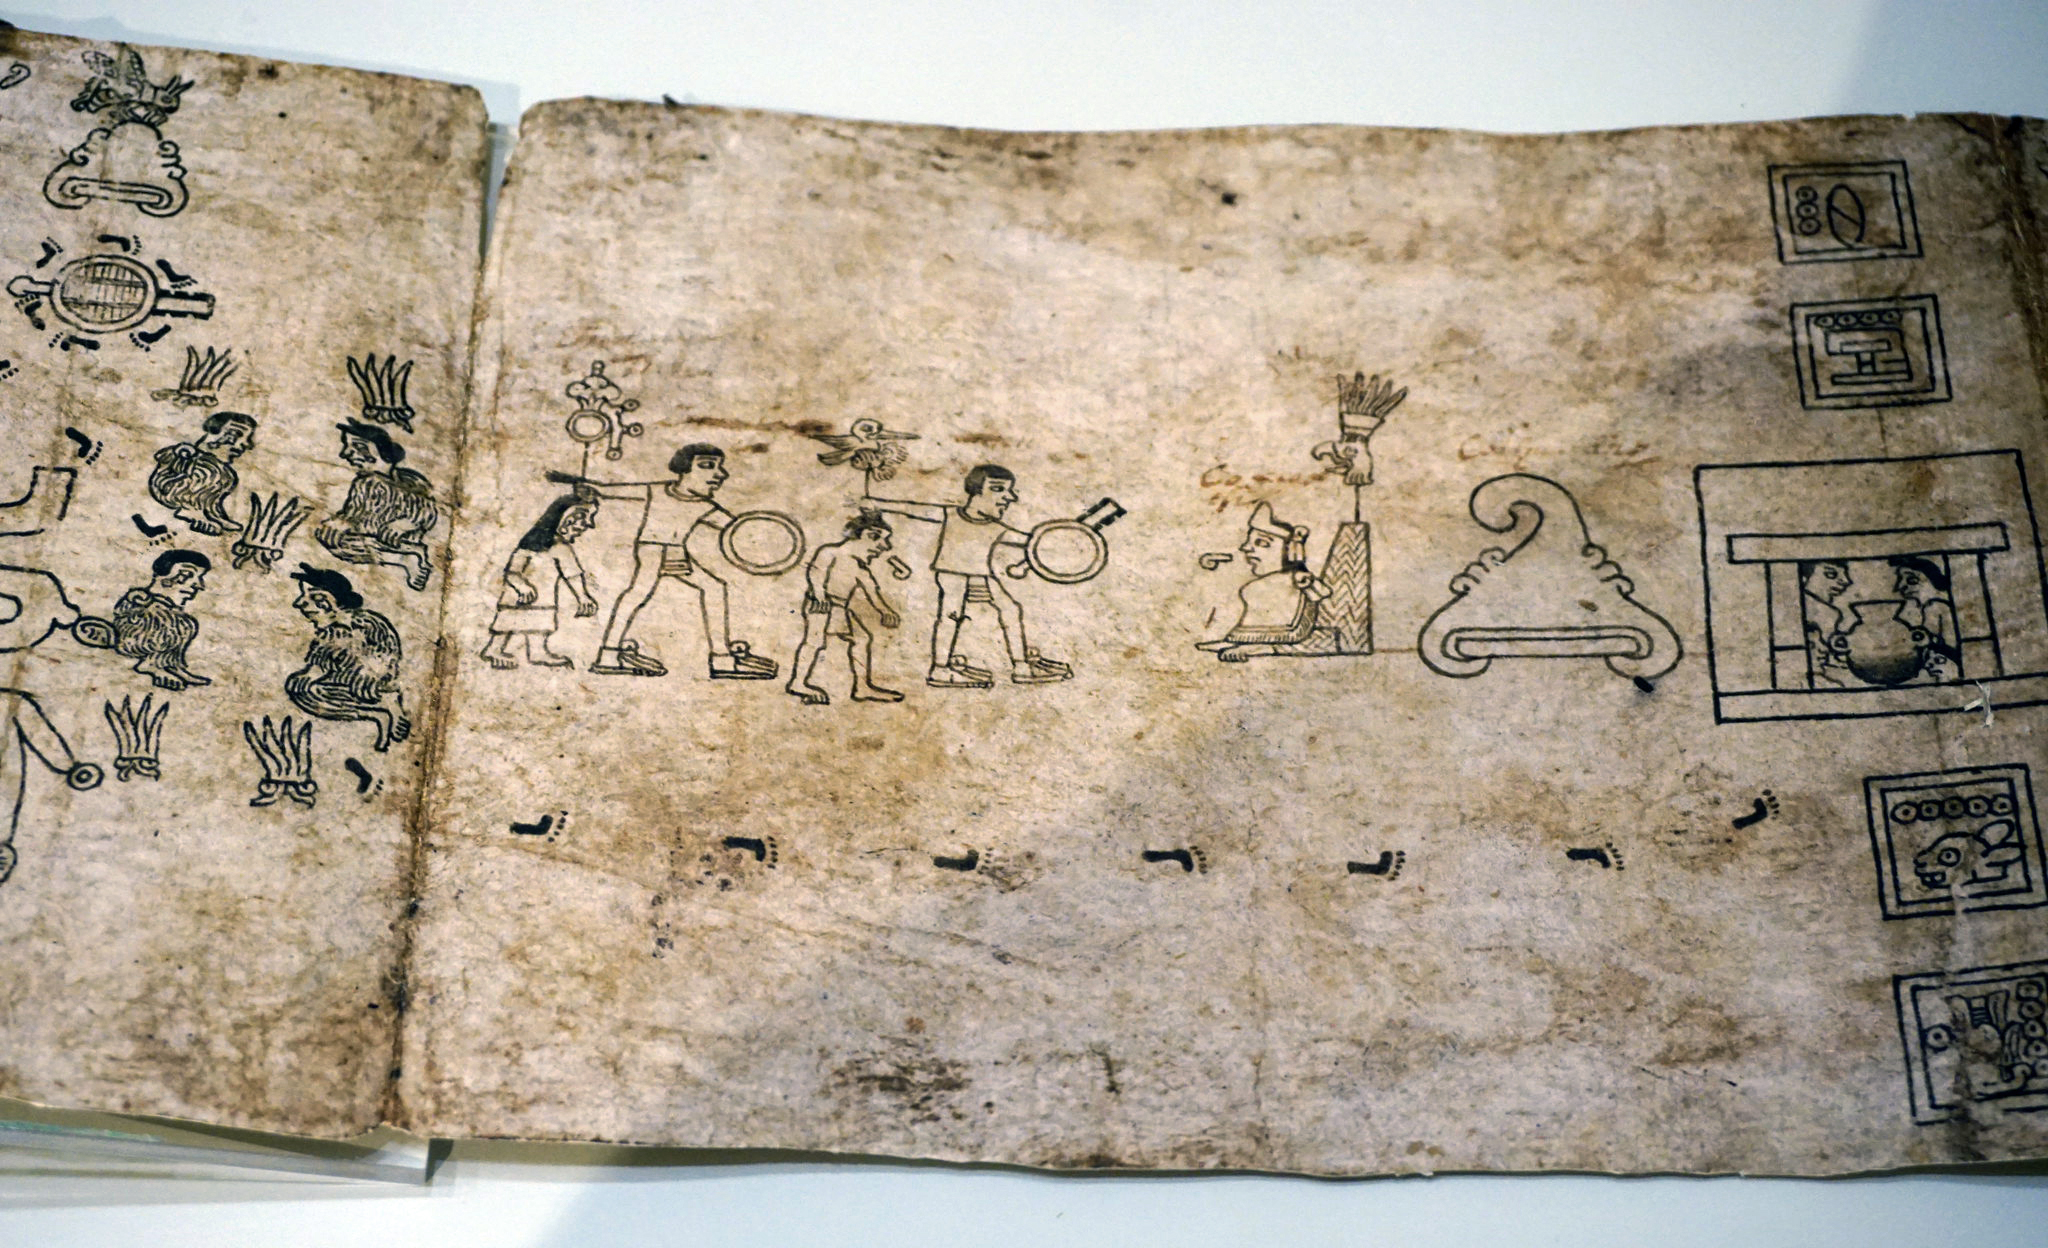 Codex Boturini, early 16th century, 19.8 x 549 centimeters (single pages are 19.8 x 25.4 centimeters), ink on amatl paper, Viceroyalty of New Spain (Museo Nacional de Antropología, Mexico City, Photo: xiroro, CC BY-NC-ND 2.0)